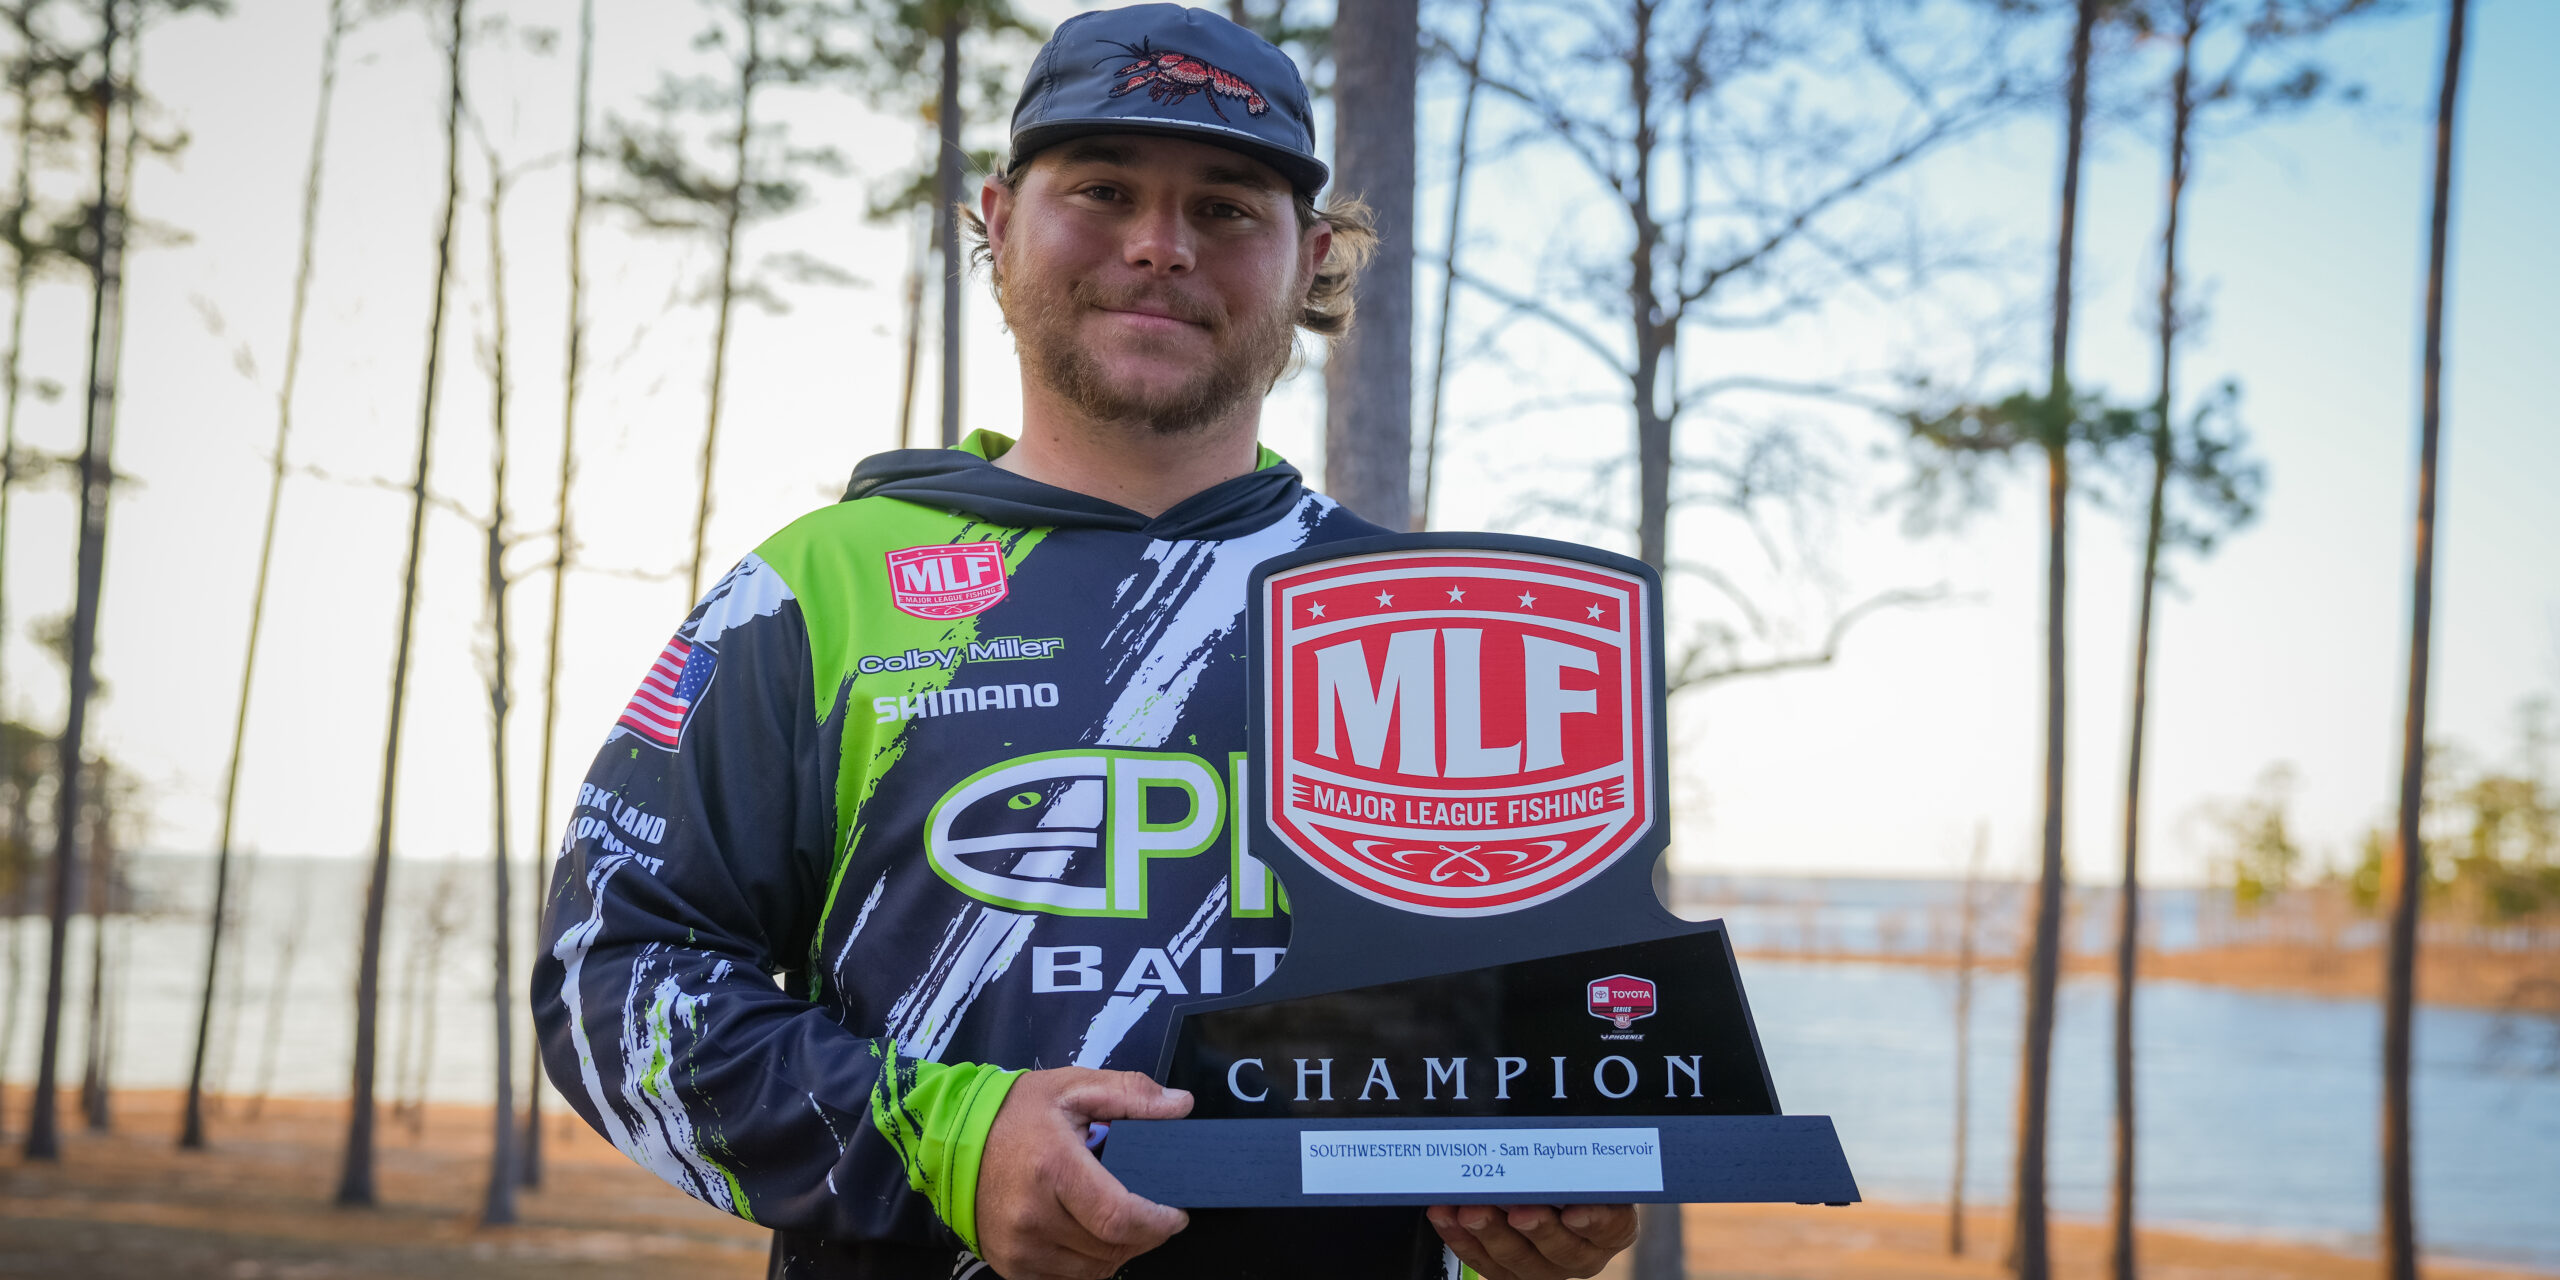 Miller dominates on Sam Rayburn with 77-7 3-day total - Major League Fishing